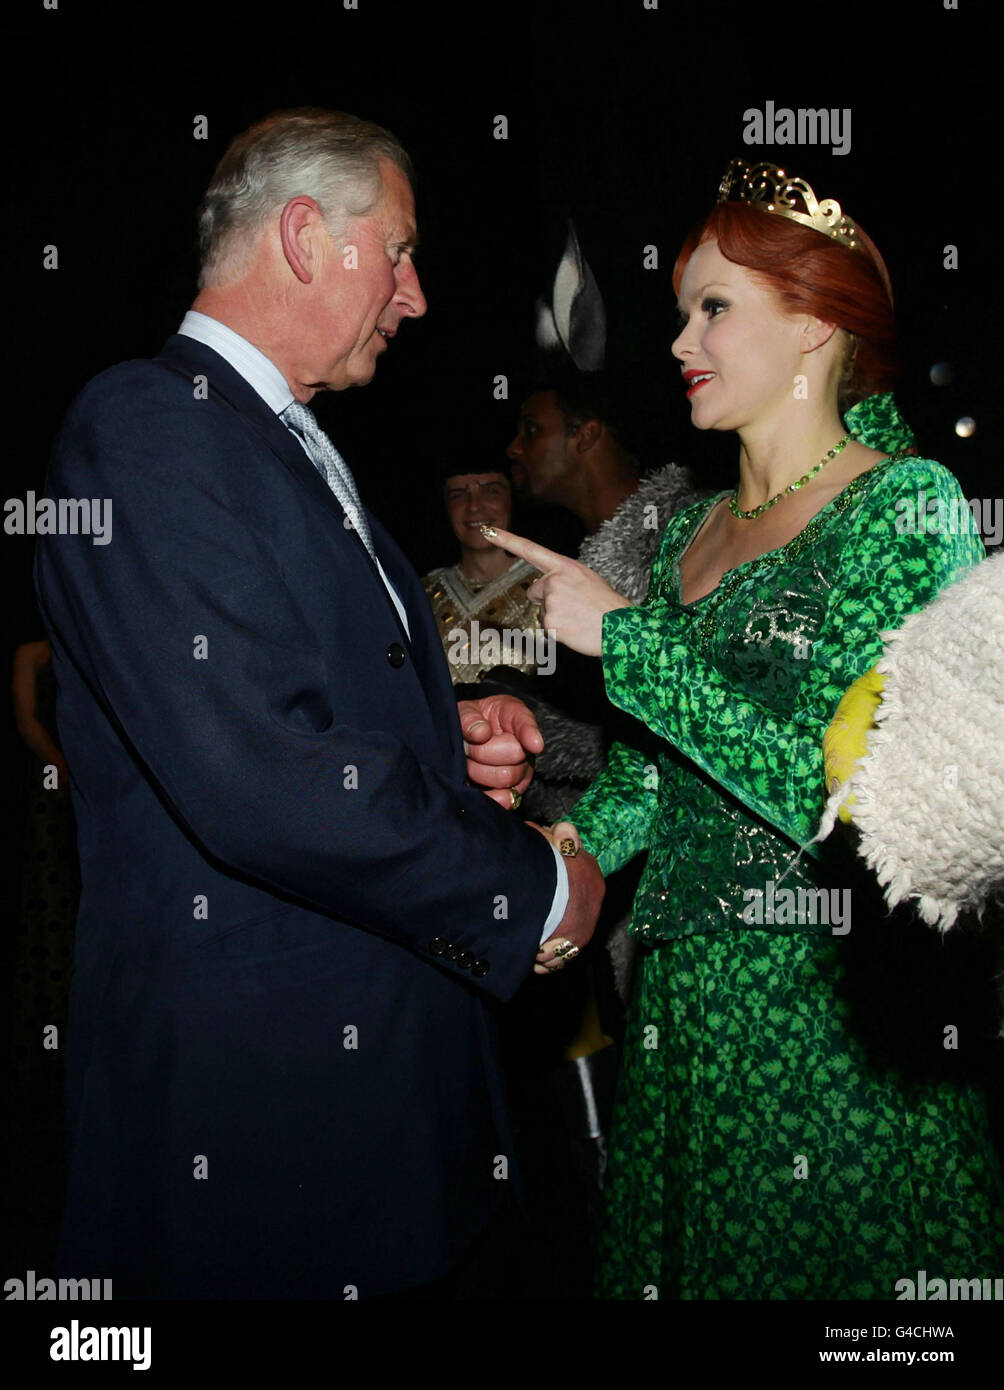 The Prince of Wales meets Amanda Holden as Princess Fiona, after a special performance of Shrek The Musical at the Theatre Royal in Drury Lane, London. Stock Photo